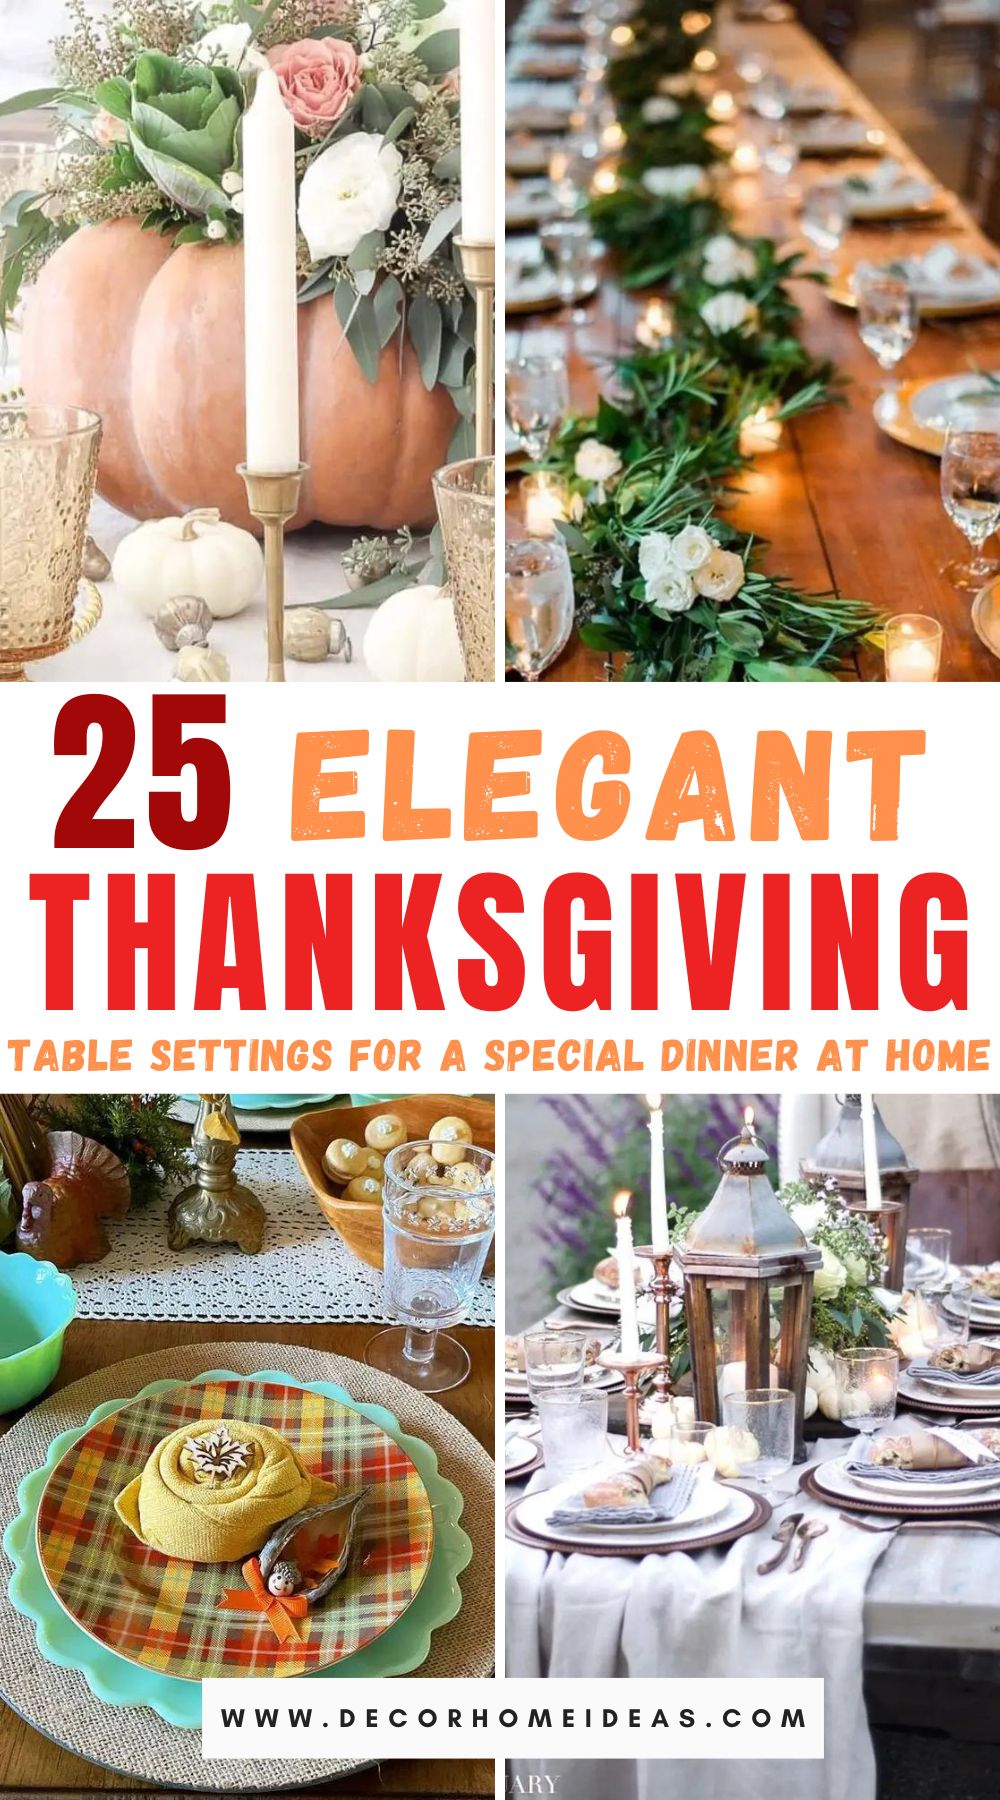 Searching for the best Thanksgiving table settings? Explore 25 creative ideas to set the perfect holiday scene, from rustic charm to modern elegance.